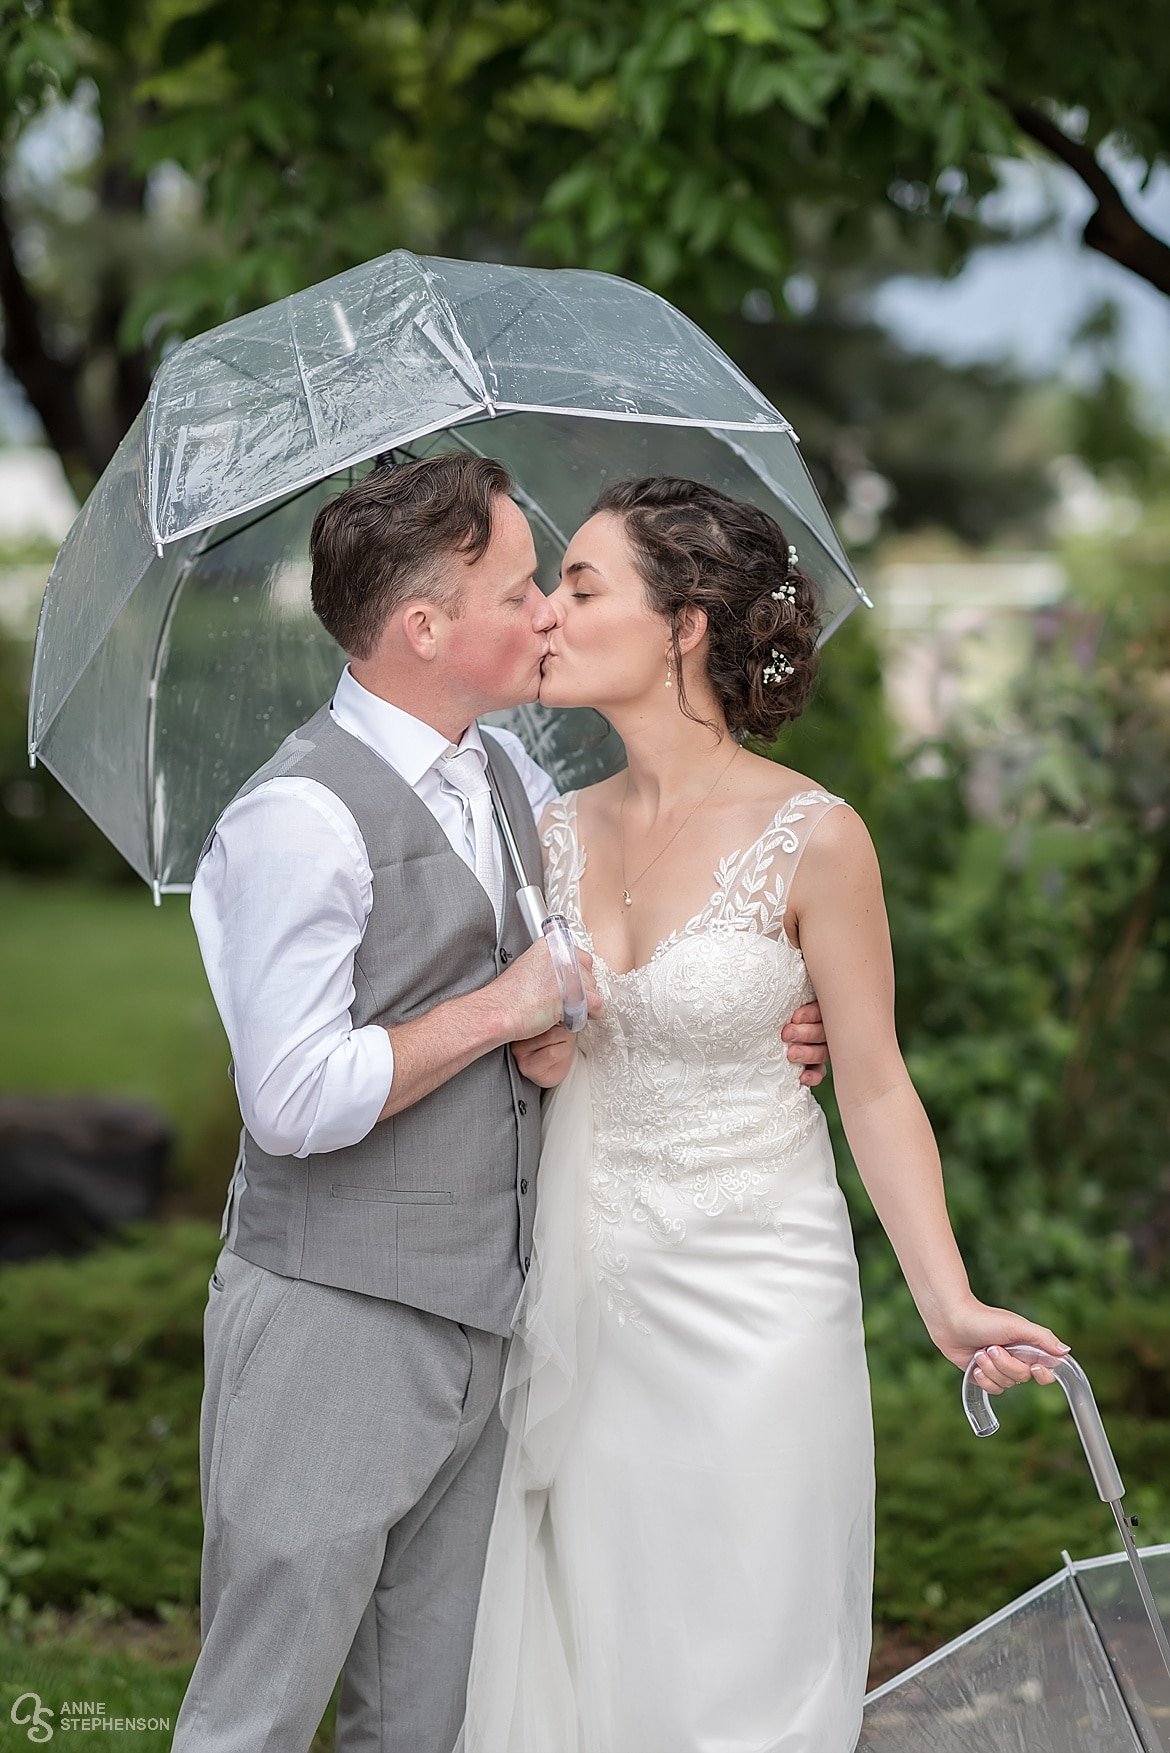 A bride and groom share a kiss under a clear plastic umbrella after their spring wedding ceremony.